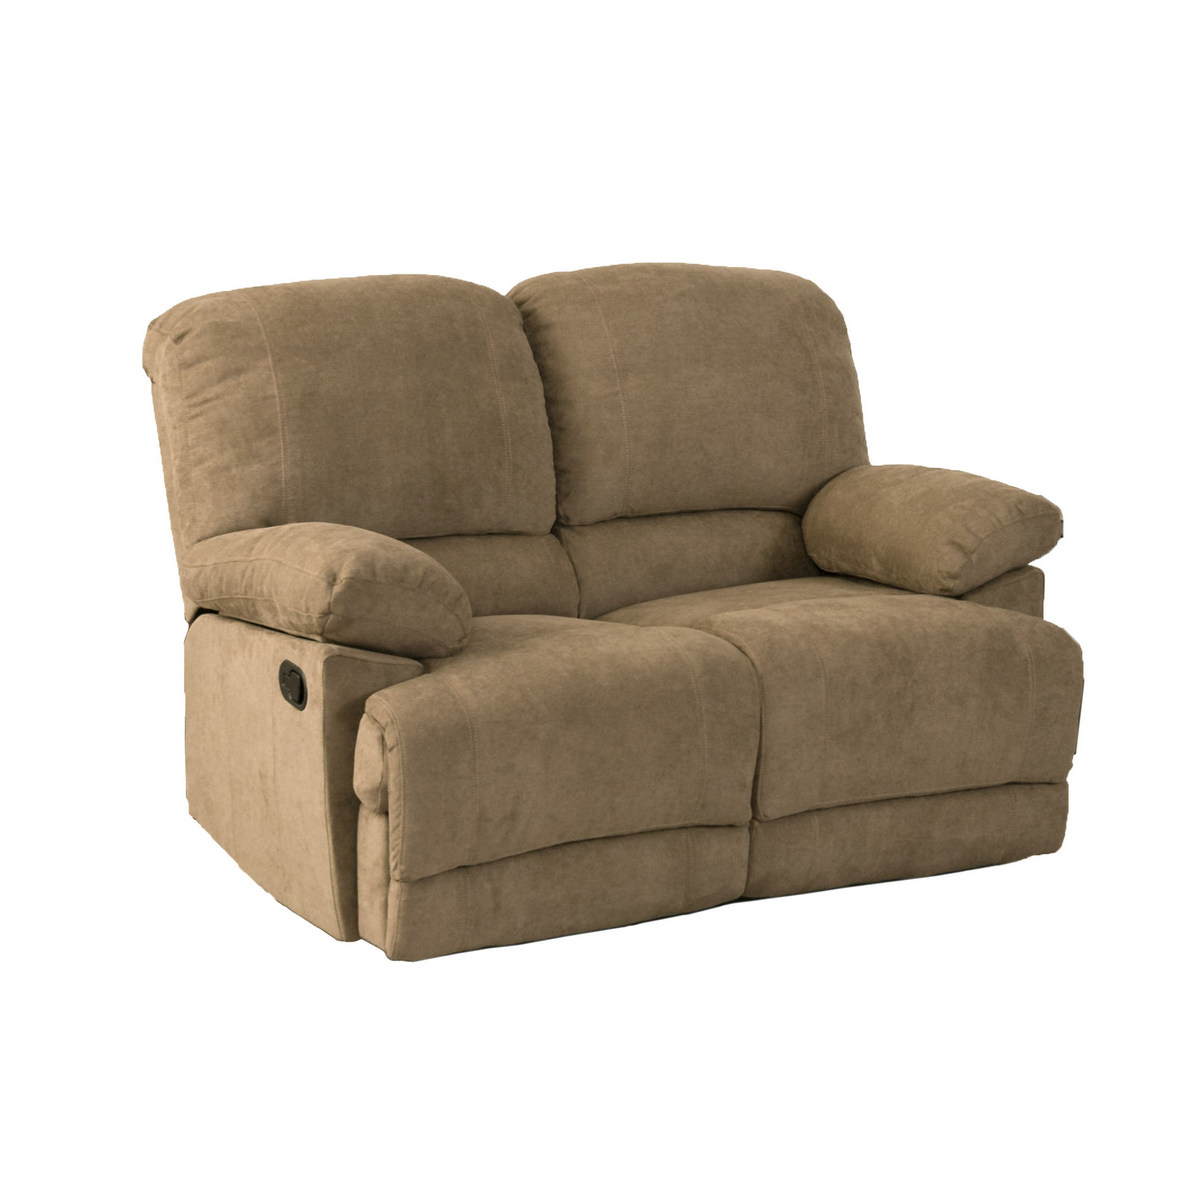 Corliving Lzy-391-l Lea Brown Chenille Fabric Reclining Loveseat